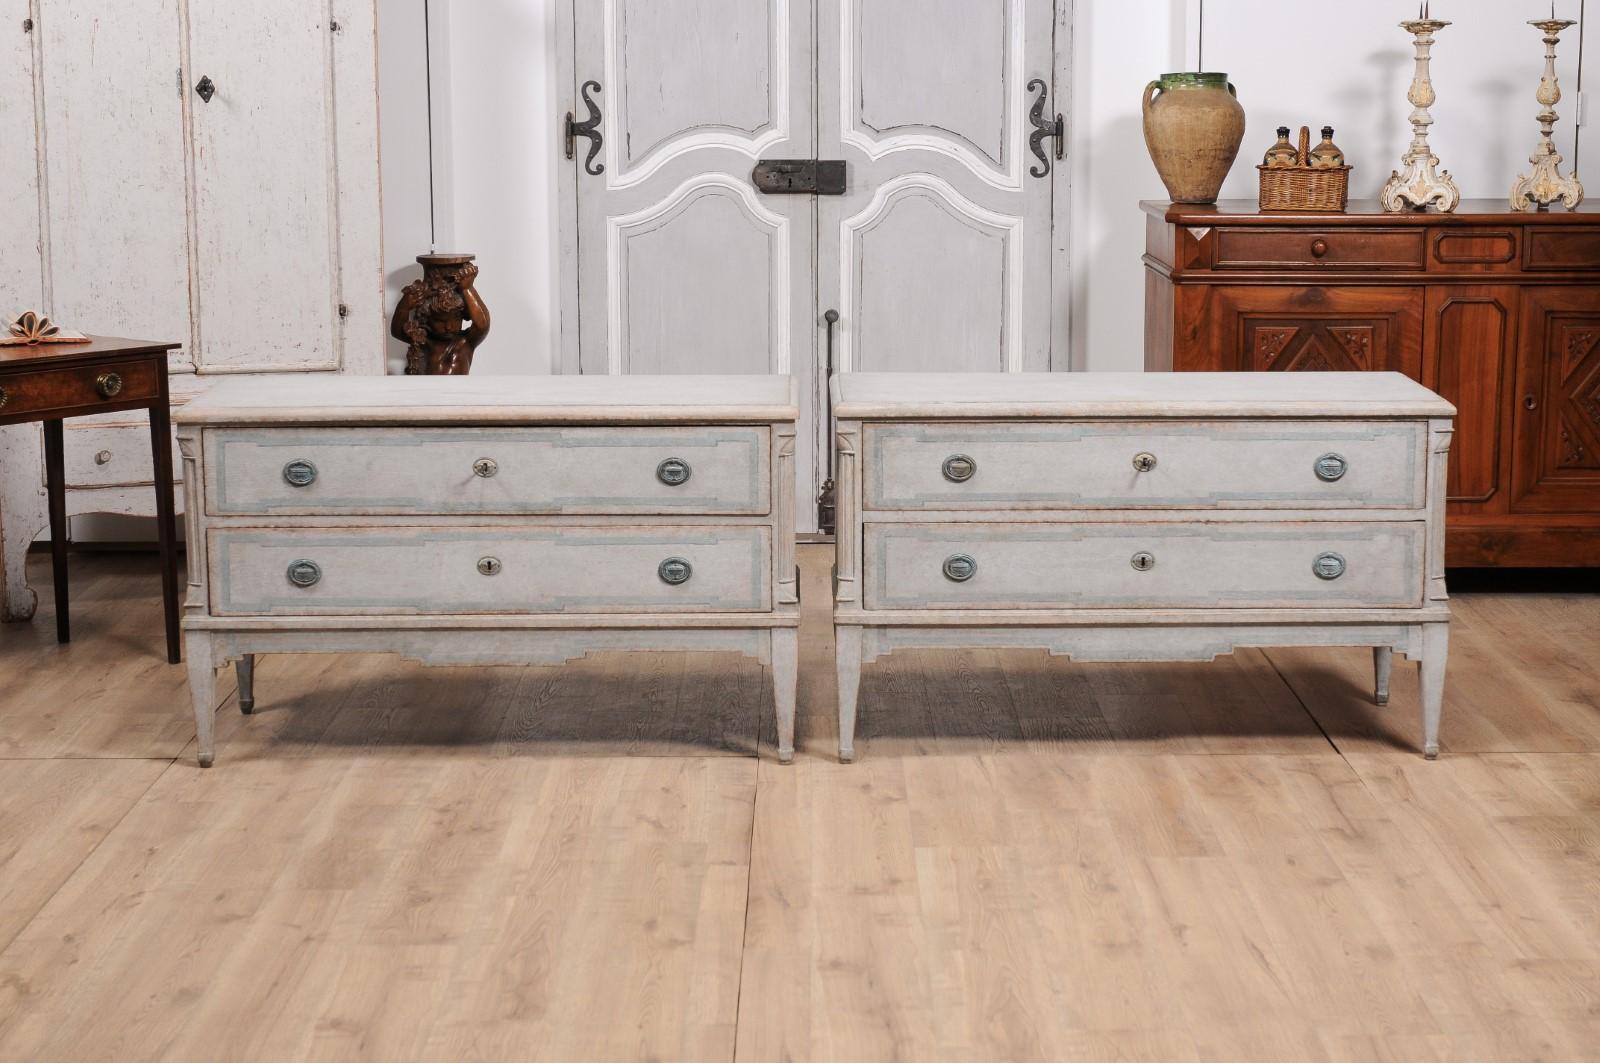 Danish 1820s Light Gray Painted Two-Drawer Chests with Semi-Columns, a Pair For Sale 7